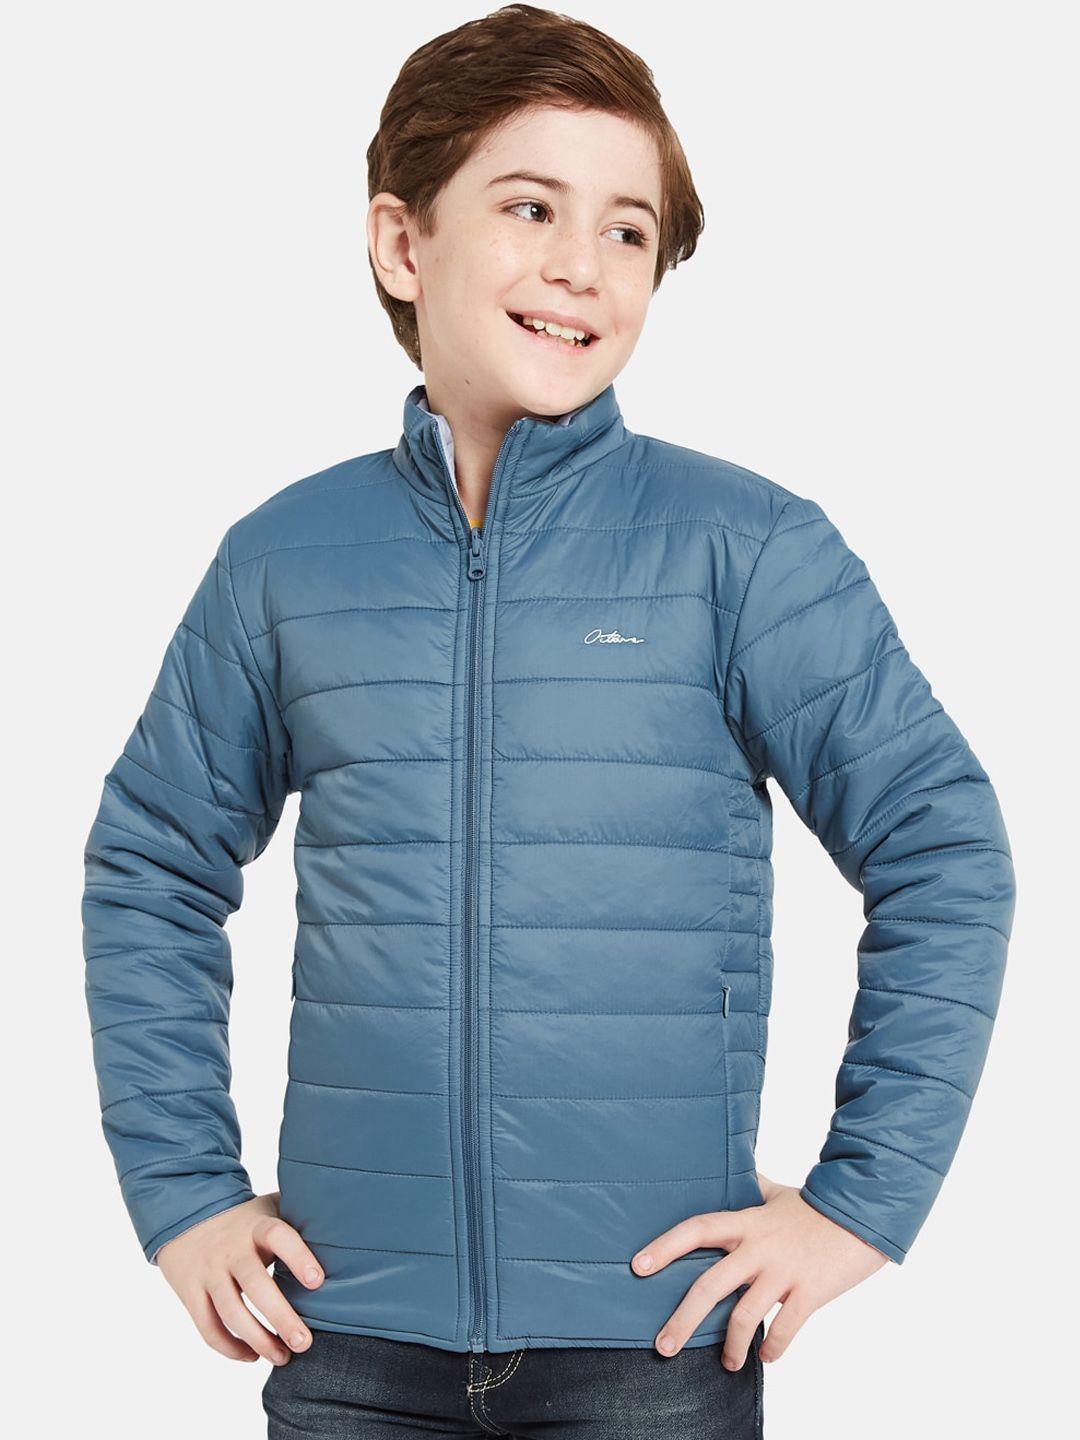 octave boys stand collar puffer jacket